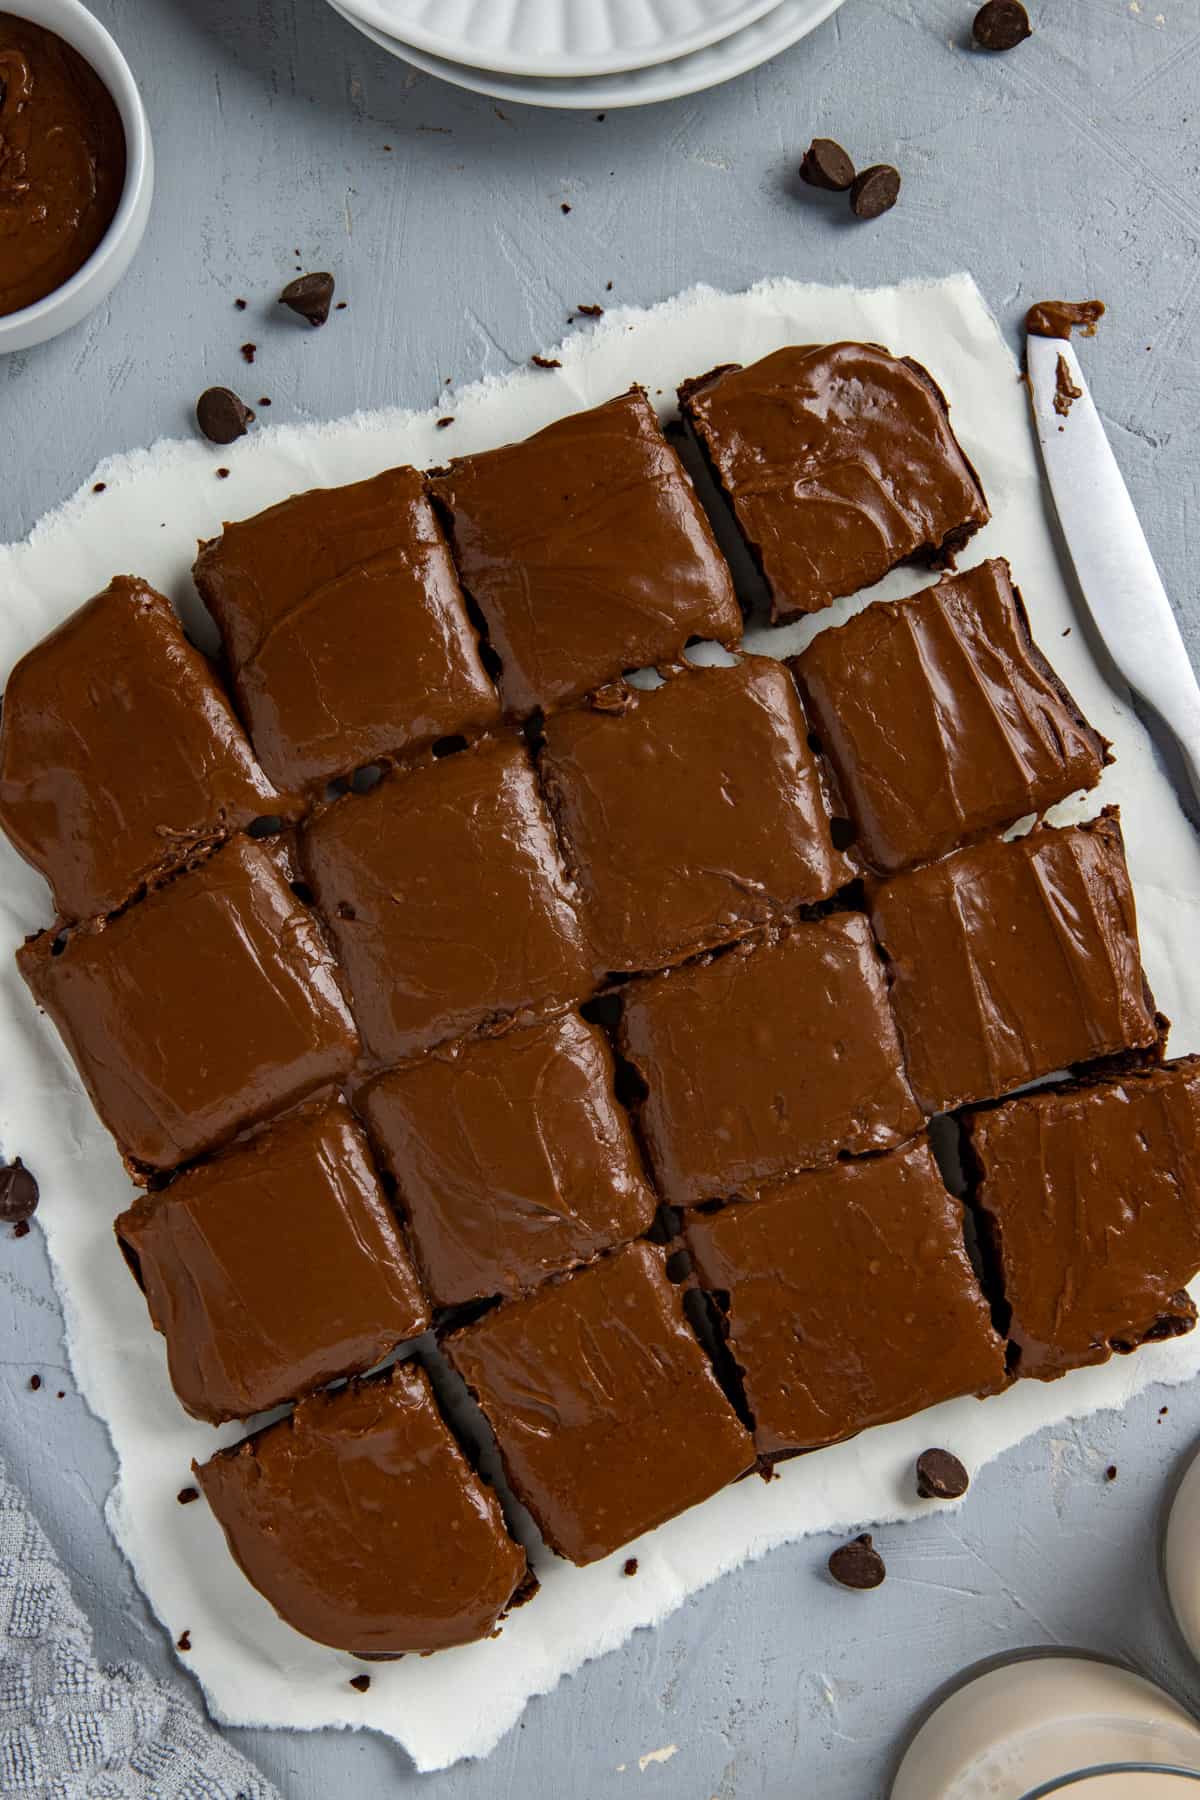 Baked and frosted brownies cut into 16 squares on white parchment paper with brownie crumbs scattered around.